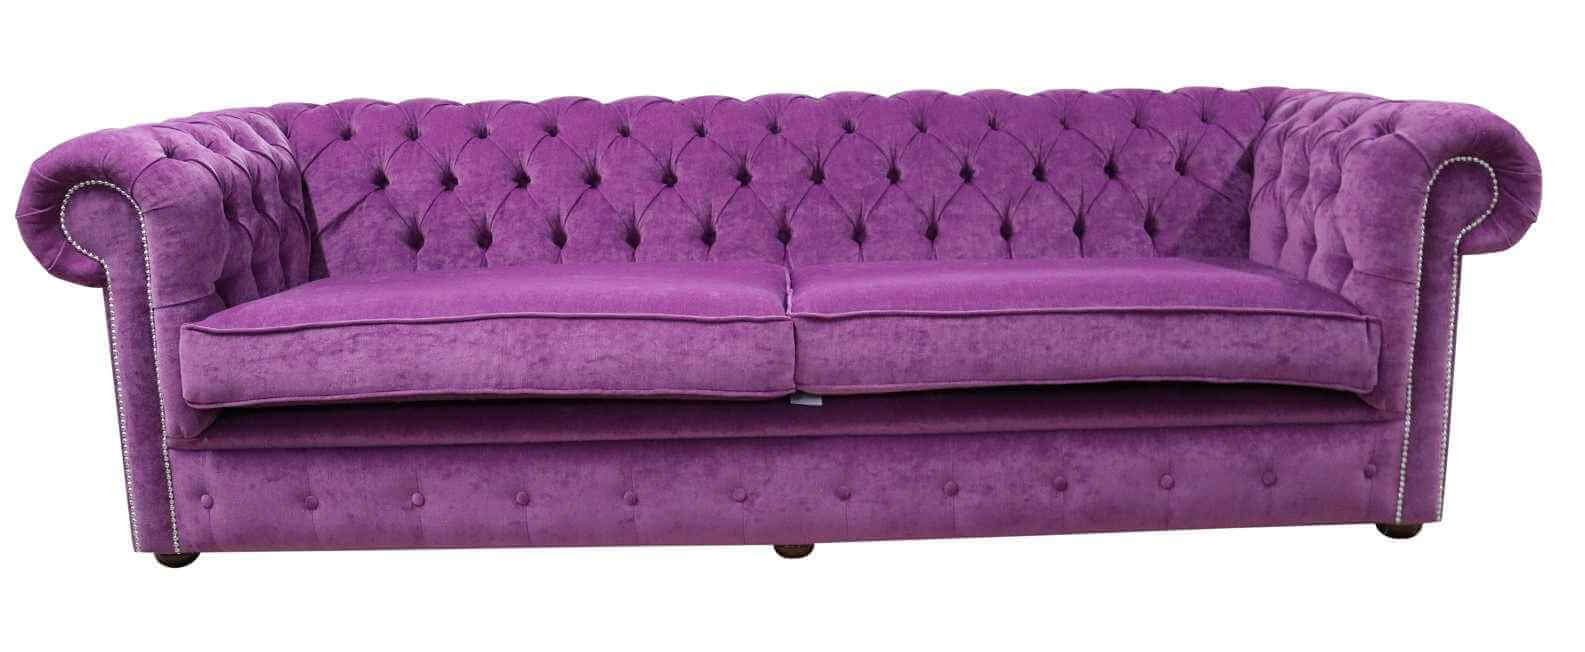 Variety in Elegance: Exploring the Diversity of Chesterfield Sofa Designs  %Post Title